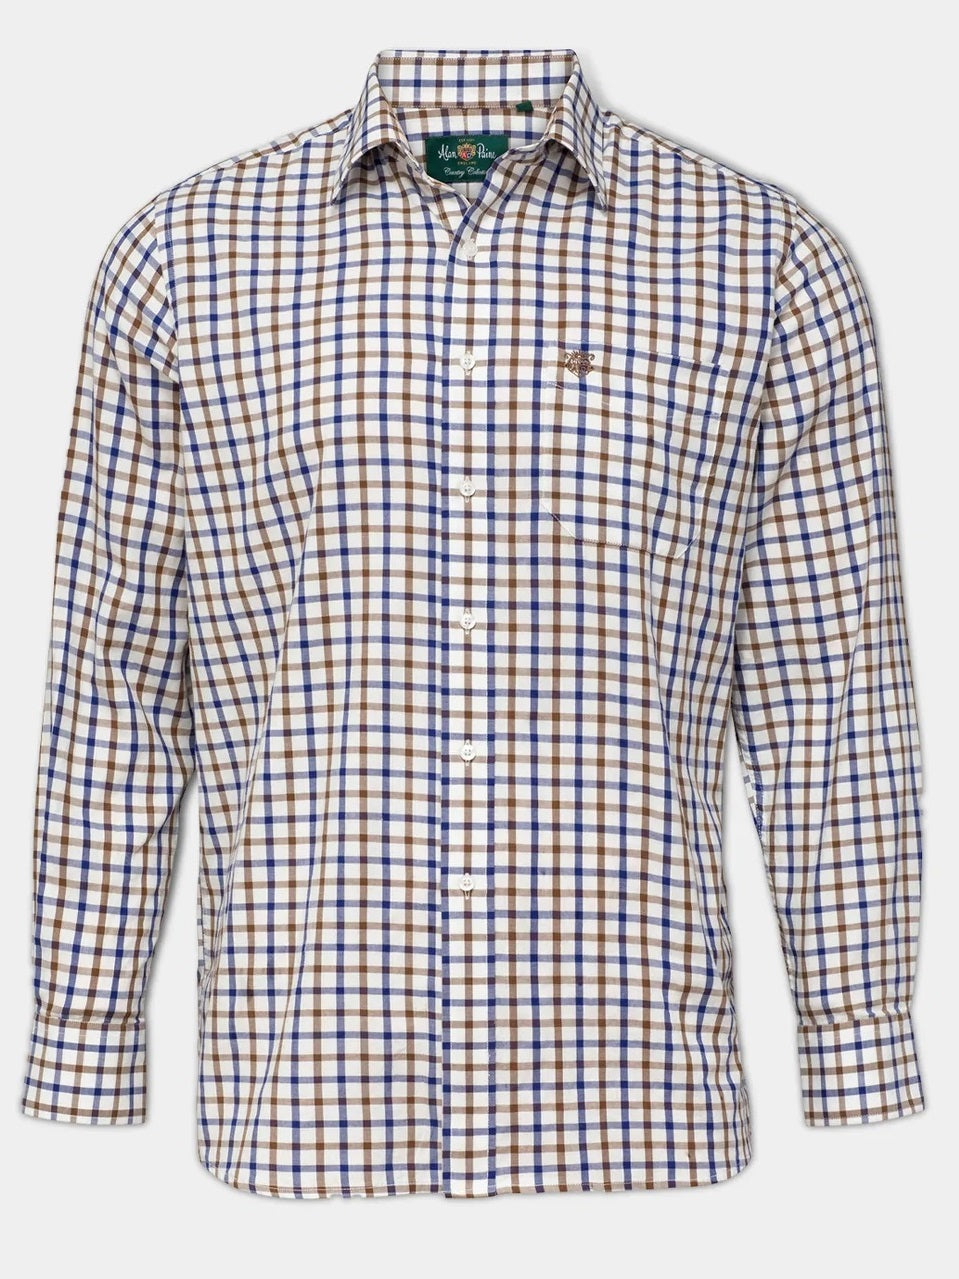 ALAN PAINE Ilkley Mens Country Check Shooting Shirt - Blue & Brown